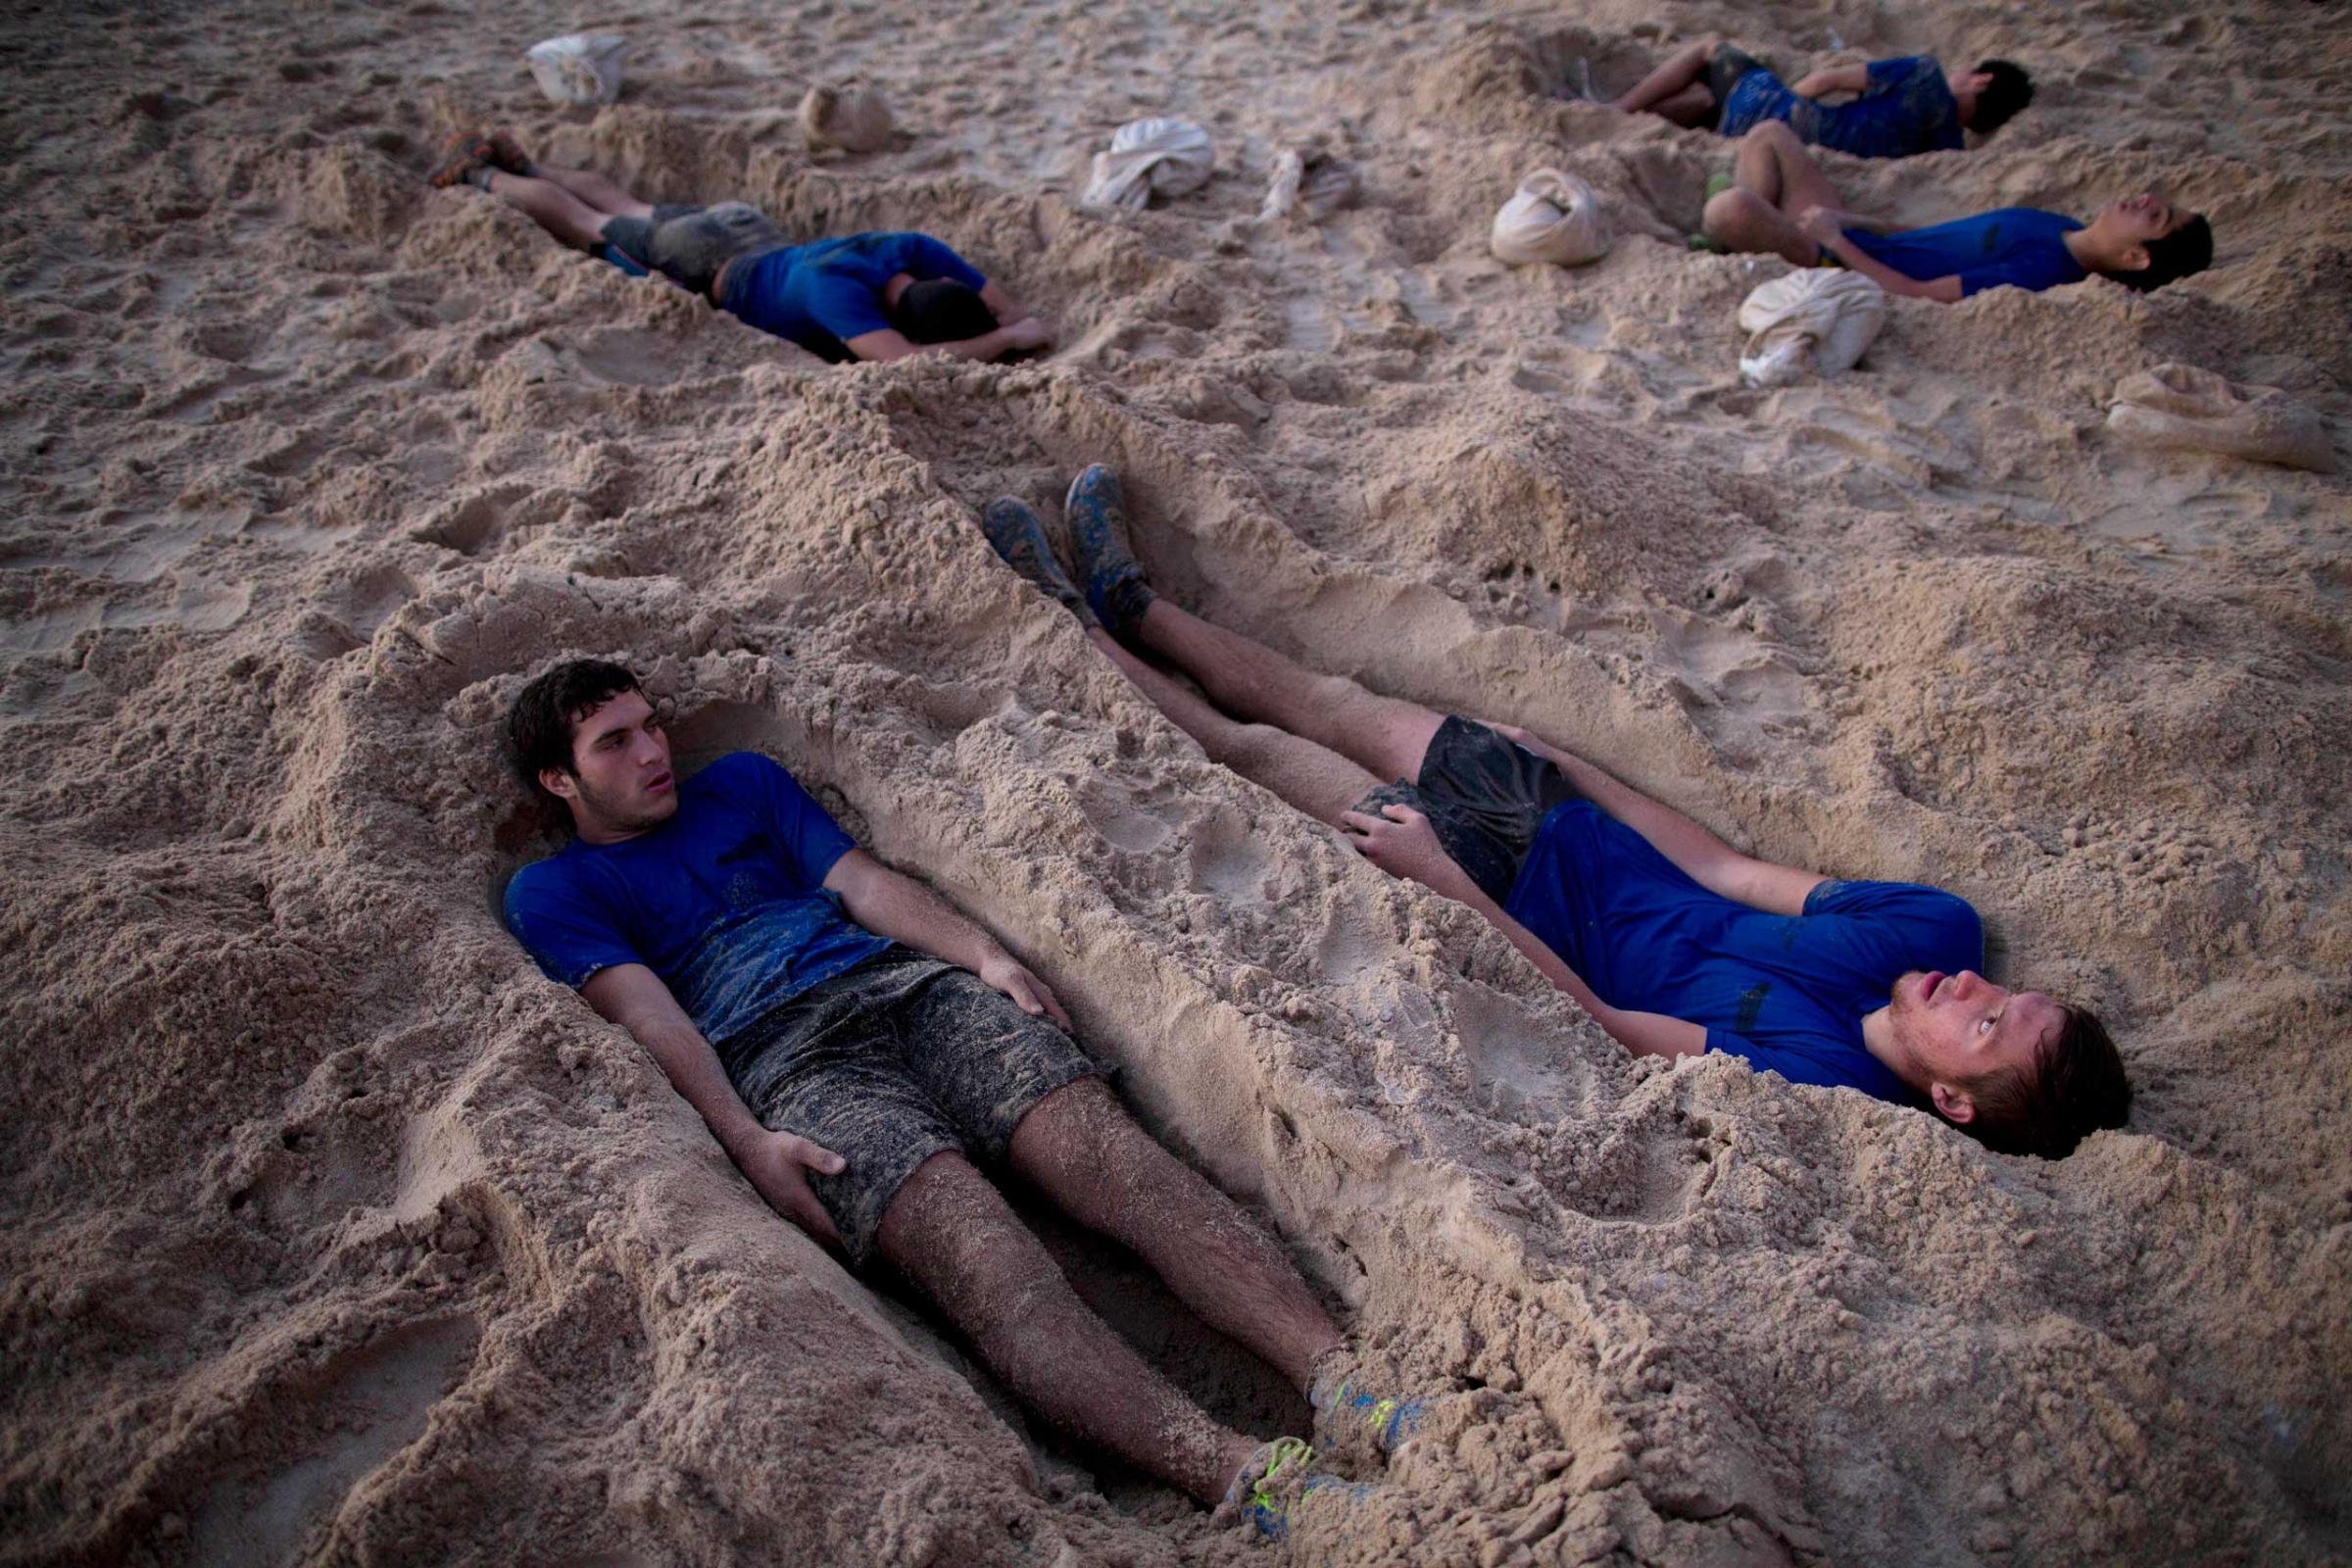 High-school seniors preparing to join the Israeli military later this year lie in foxholes during training in Shefayim, central Israel, March 5, 2015.